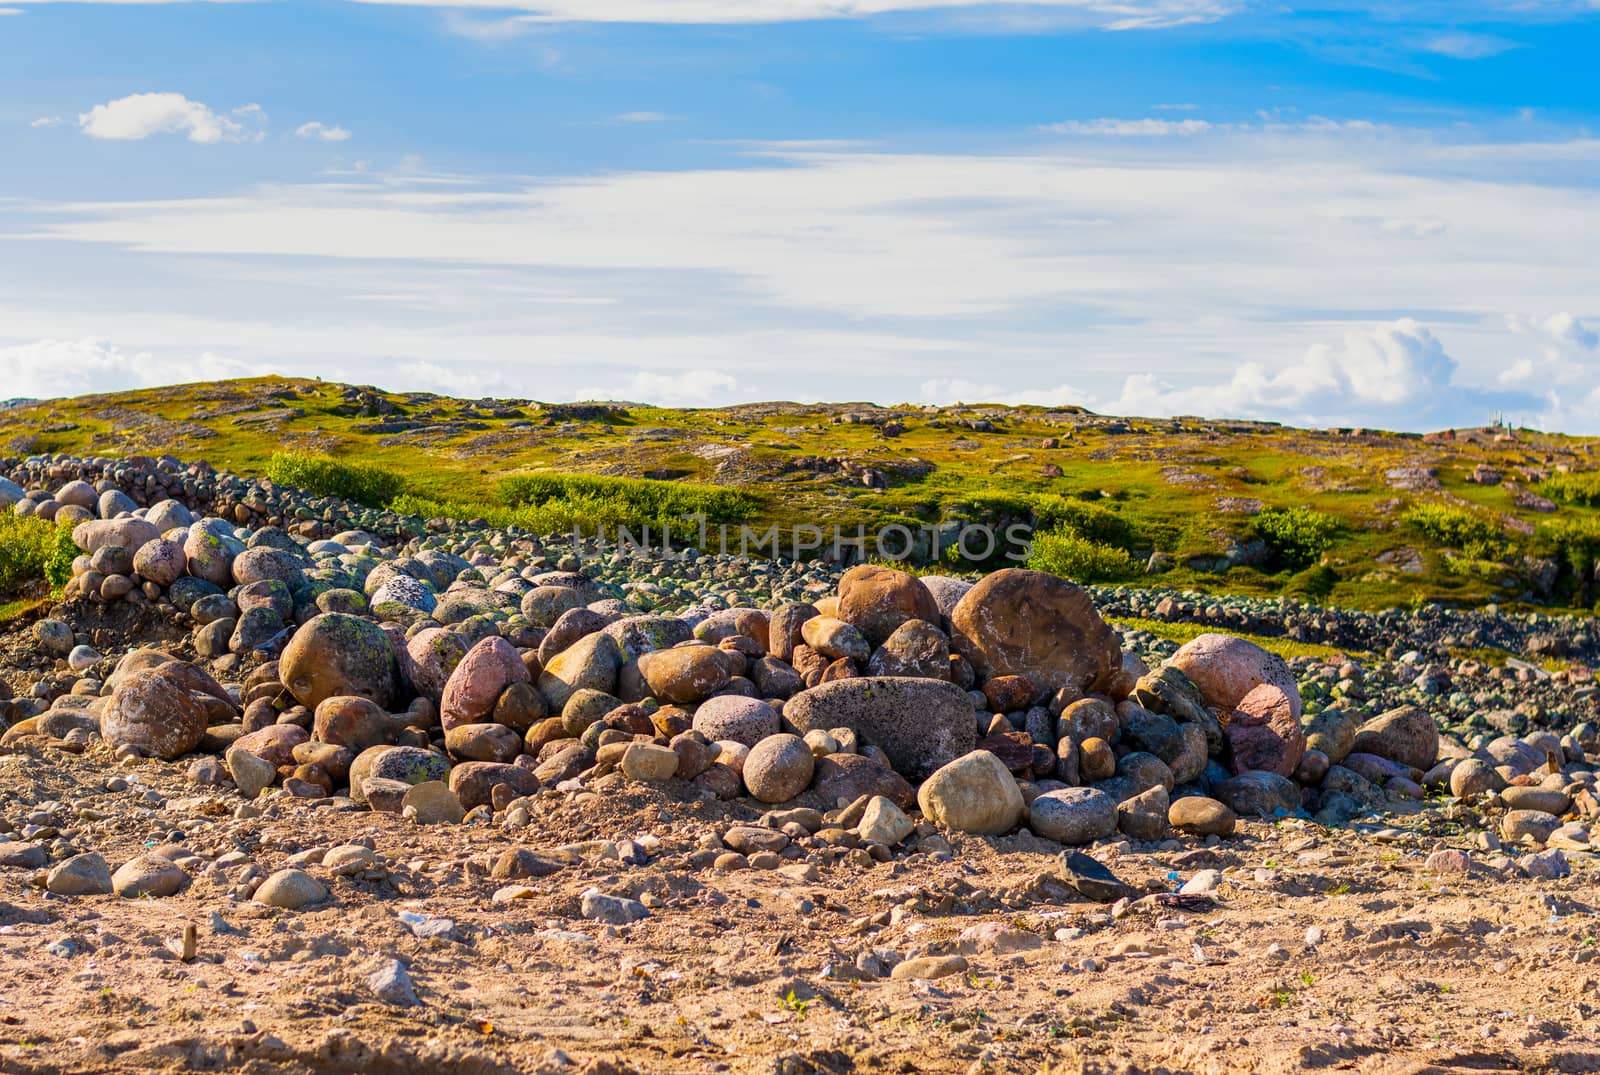 A handful of huge stones surrounded by grass. Bright sky in the clouds. Hills in the background.